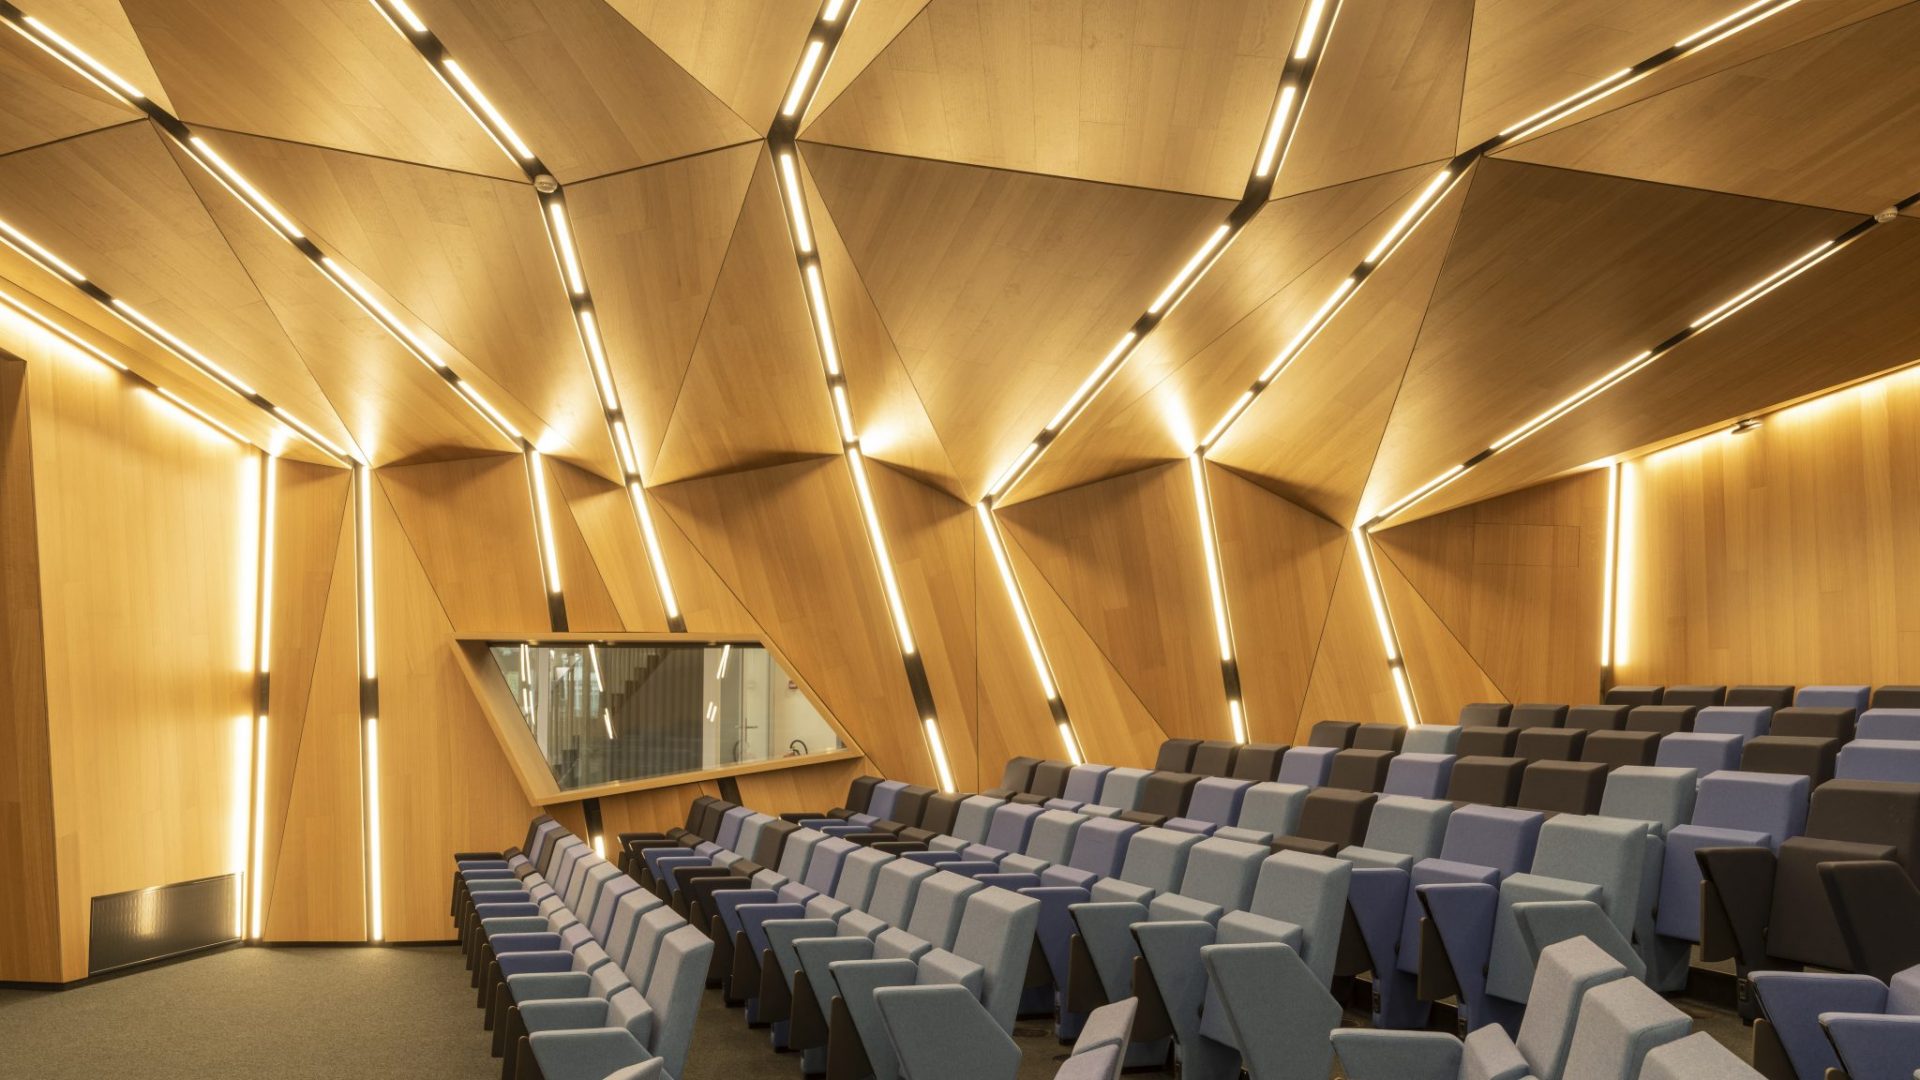 ISREC's Paternot Auditorium in the AGORA Cancer Research Center